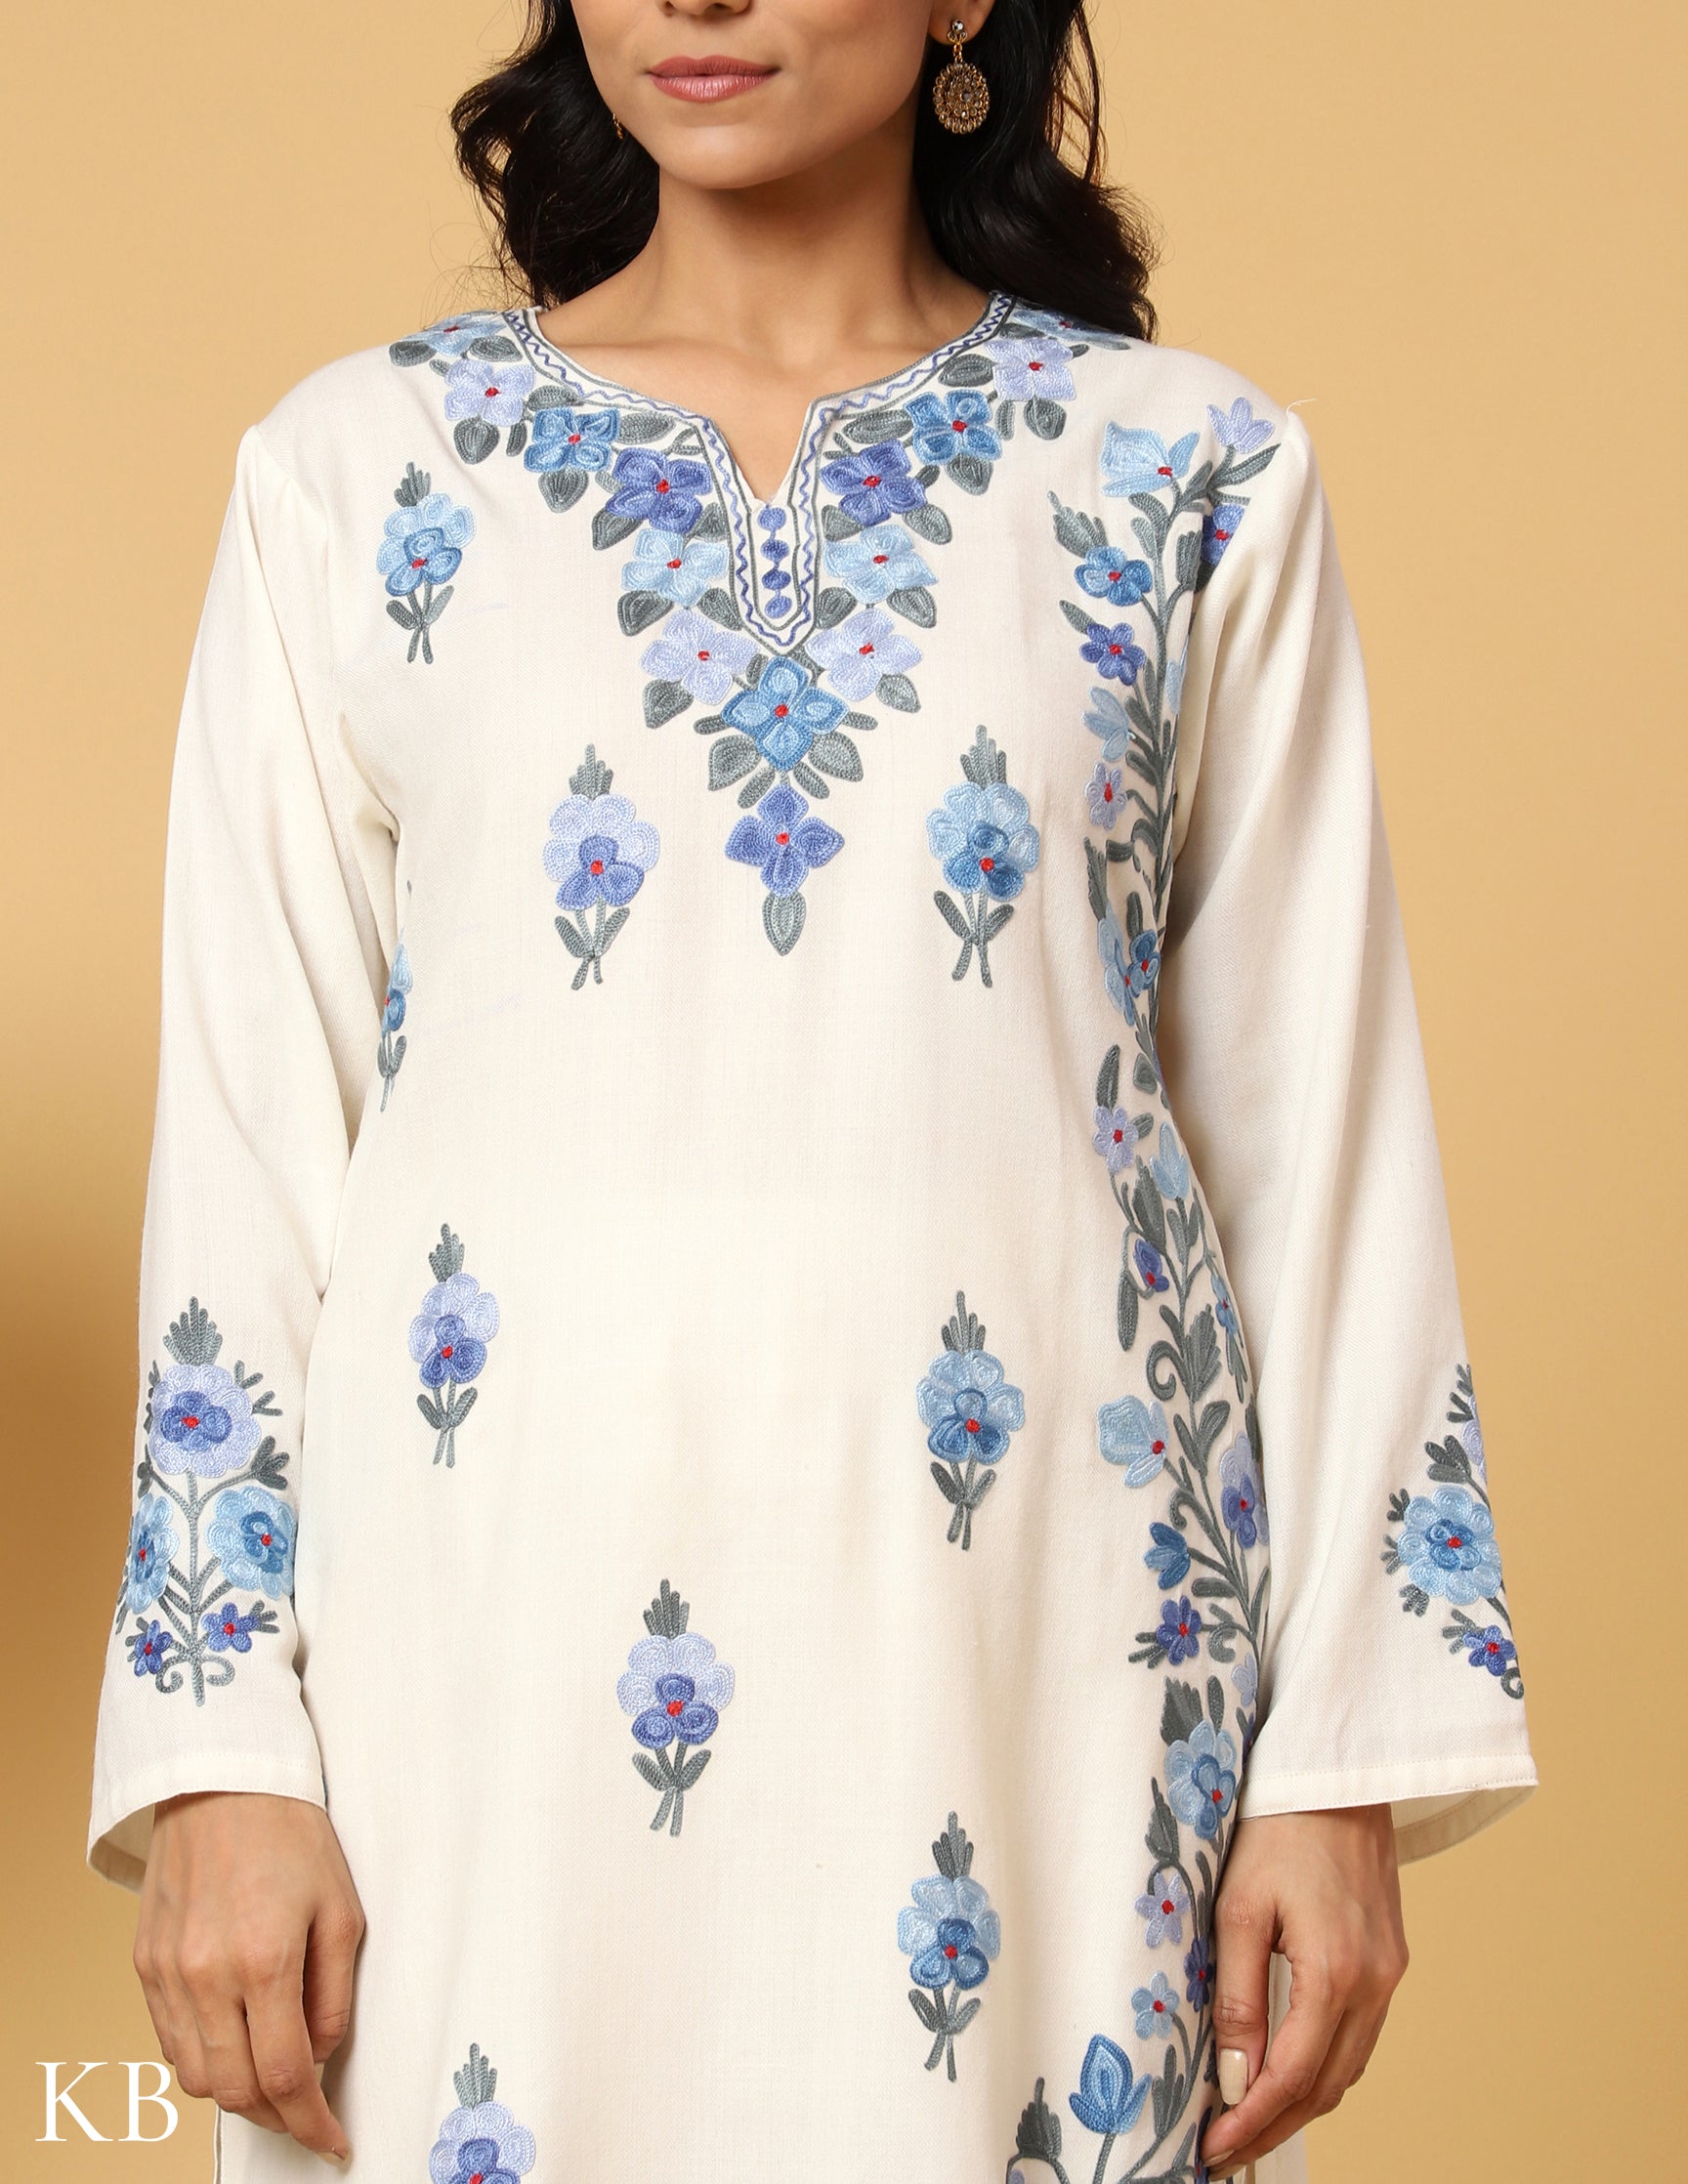 Buy Kashmir Gallery Woolen Women Kurtis for Winter with Charming Kashmiri  Zari Embroidery Warm and Beautiful Unique Product Best for Cold Weather  Free Size - 2XL at Amazon.in